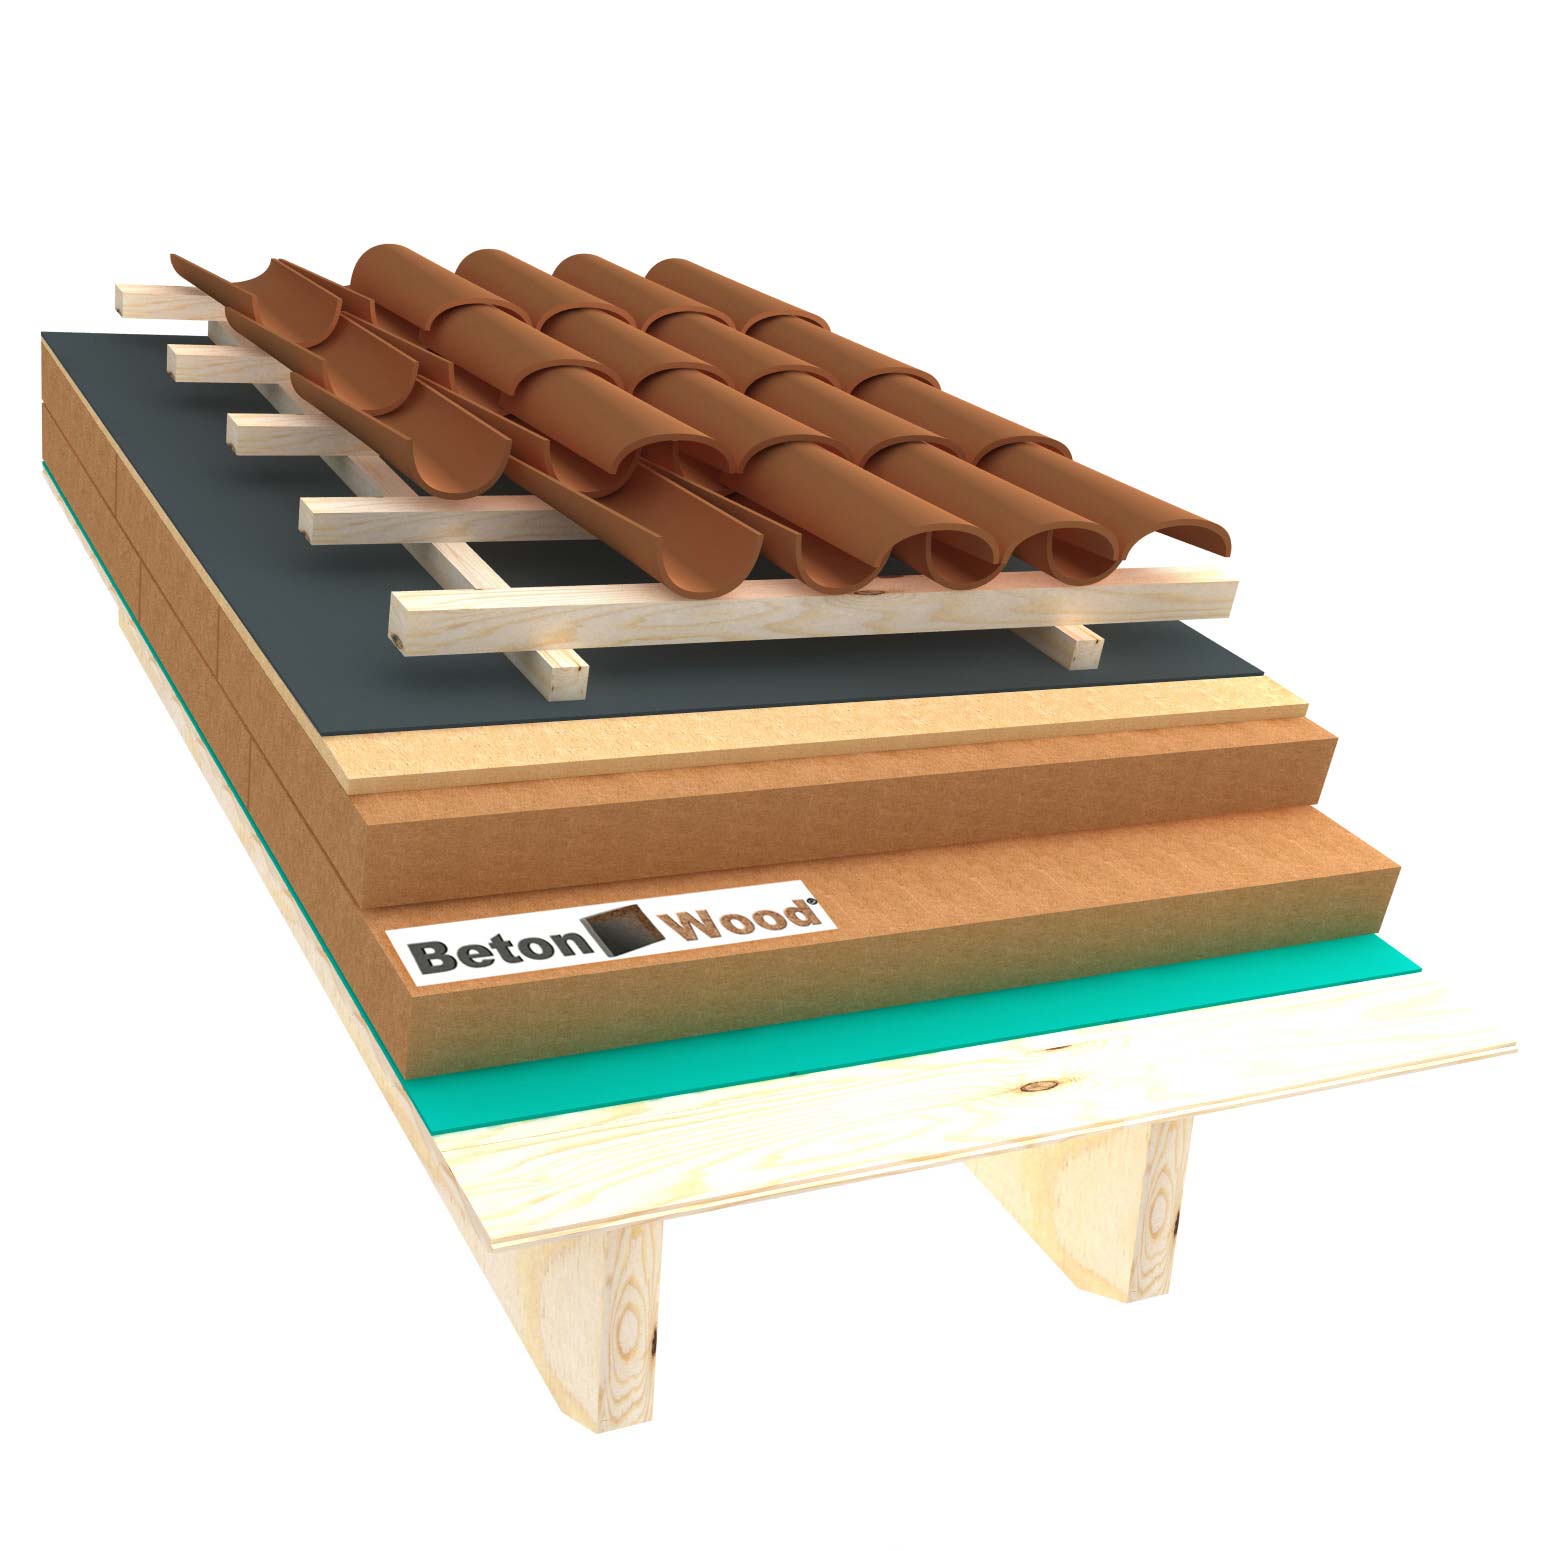 Ventilated roof with fiber wood Isorel and Special on matchboarding